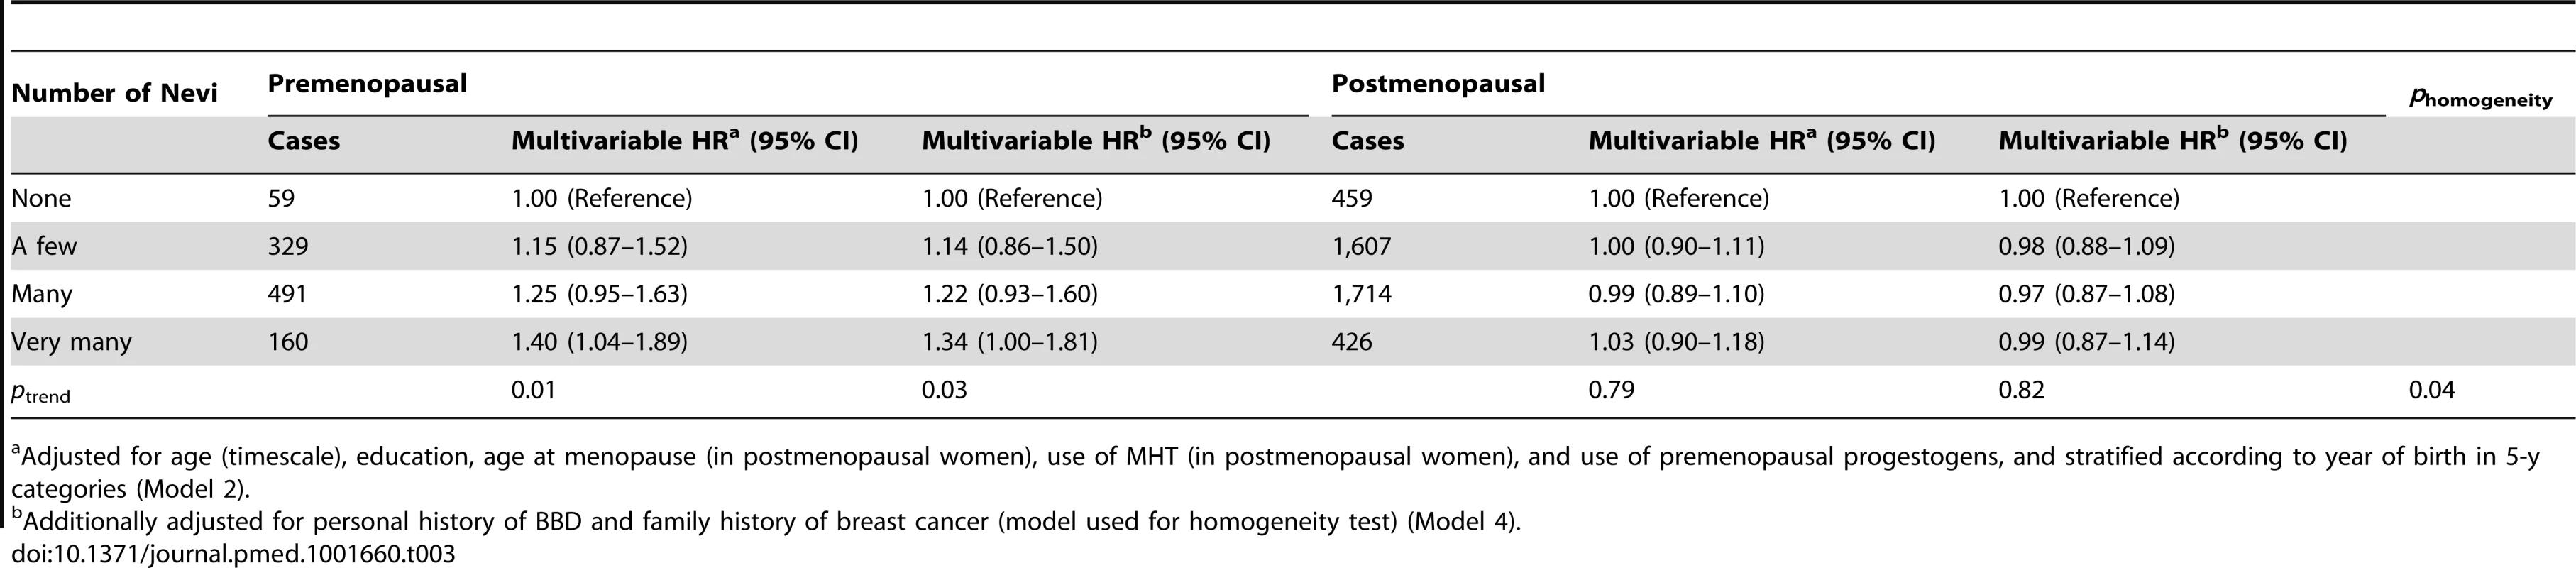 Hazard ratios and 95% confidence intervals for risk of breast cancer in relation to number of nevi, stratified by menopausal status, E3N cohort (<i>n = </i>89,802).